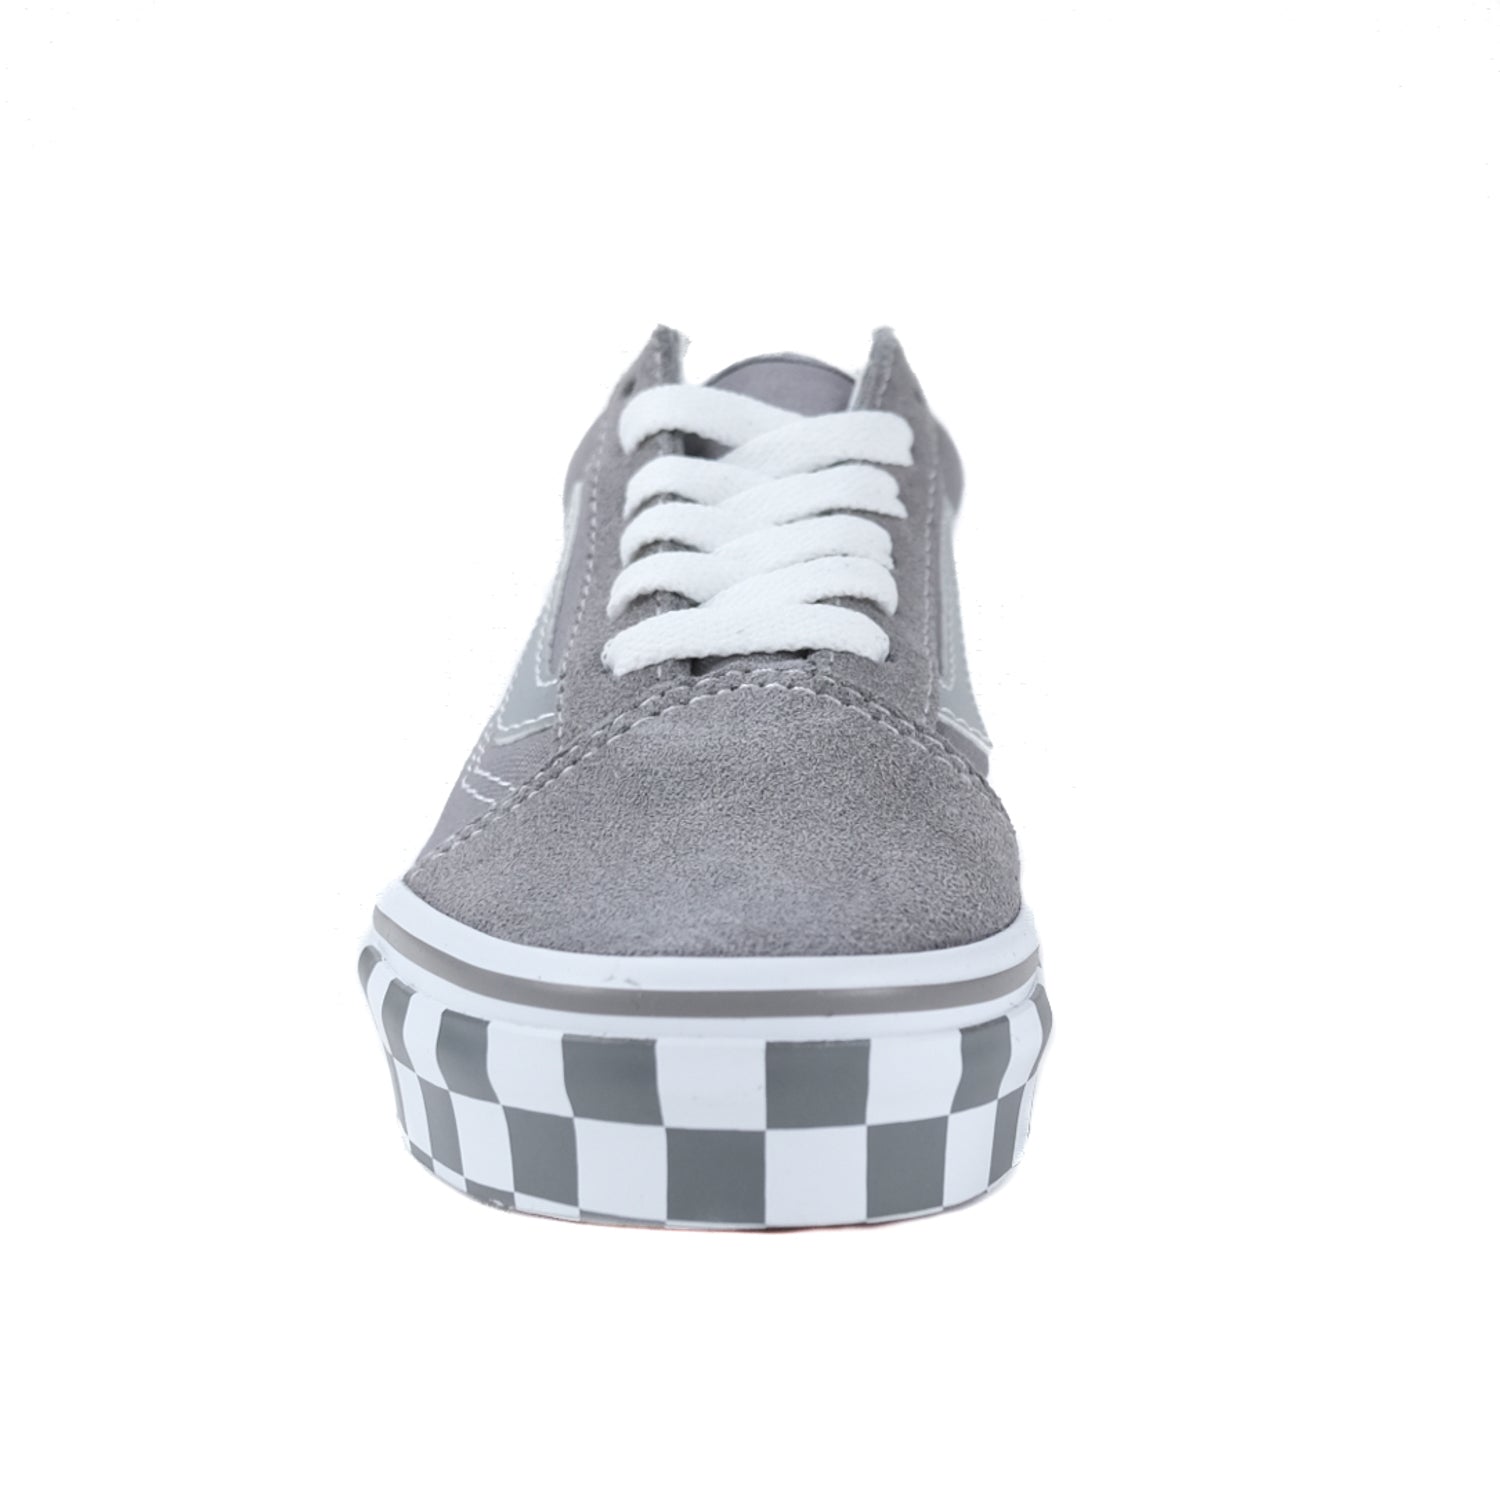 Youth Old Skool - (Reflective Sidestripe) Checkerboard